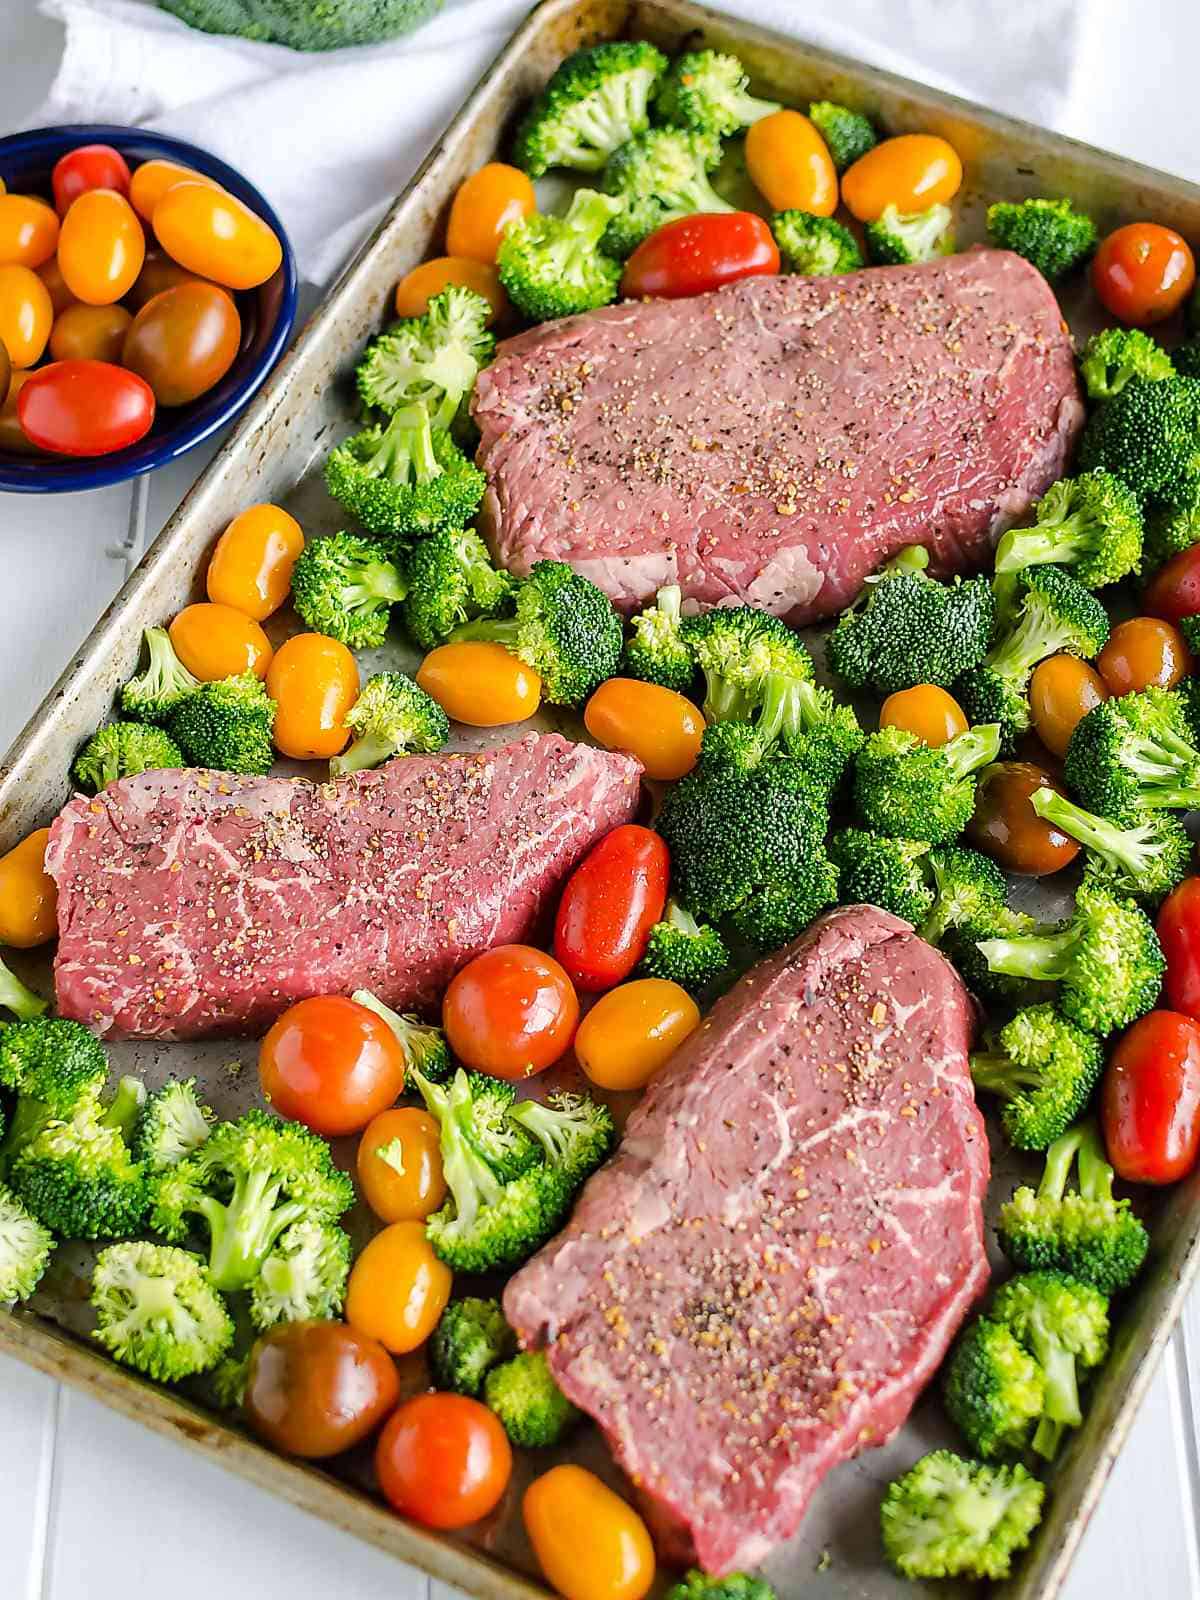 Steak, broccoli, and multi colored cherry tomatoes spread neatly on a sheet pan before cooking. Steak is seasoned with steak seasoning.